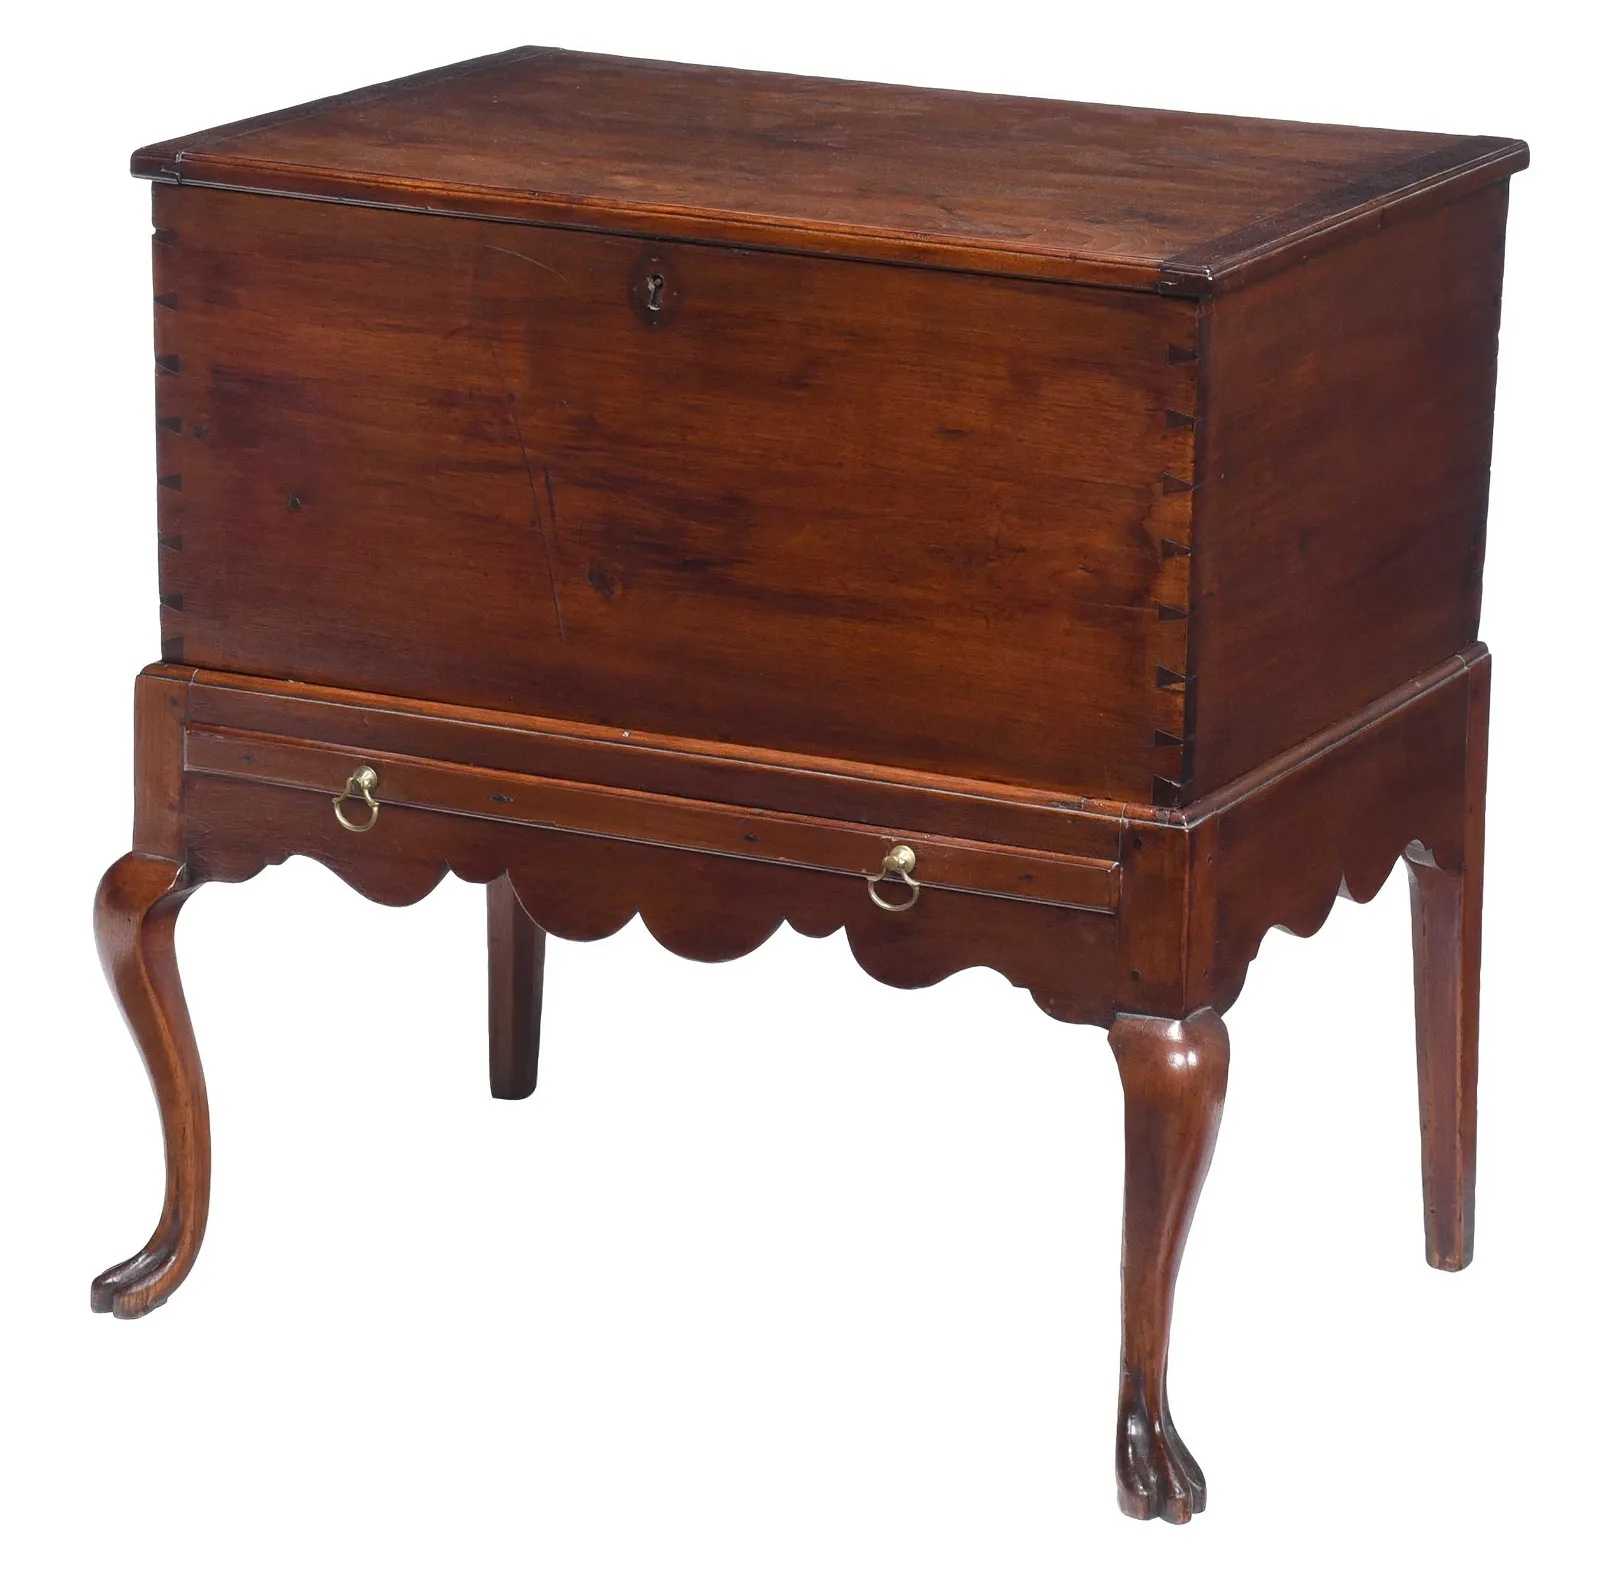 Virginia Chippandale walnut fitted cellaret, which sold for $95,000 ($121,600 with buyer’s premium) at Brunk.